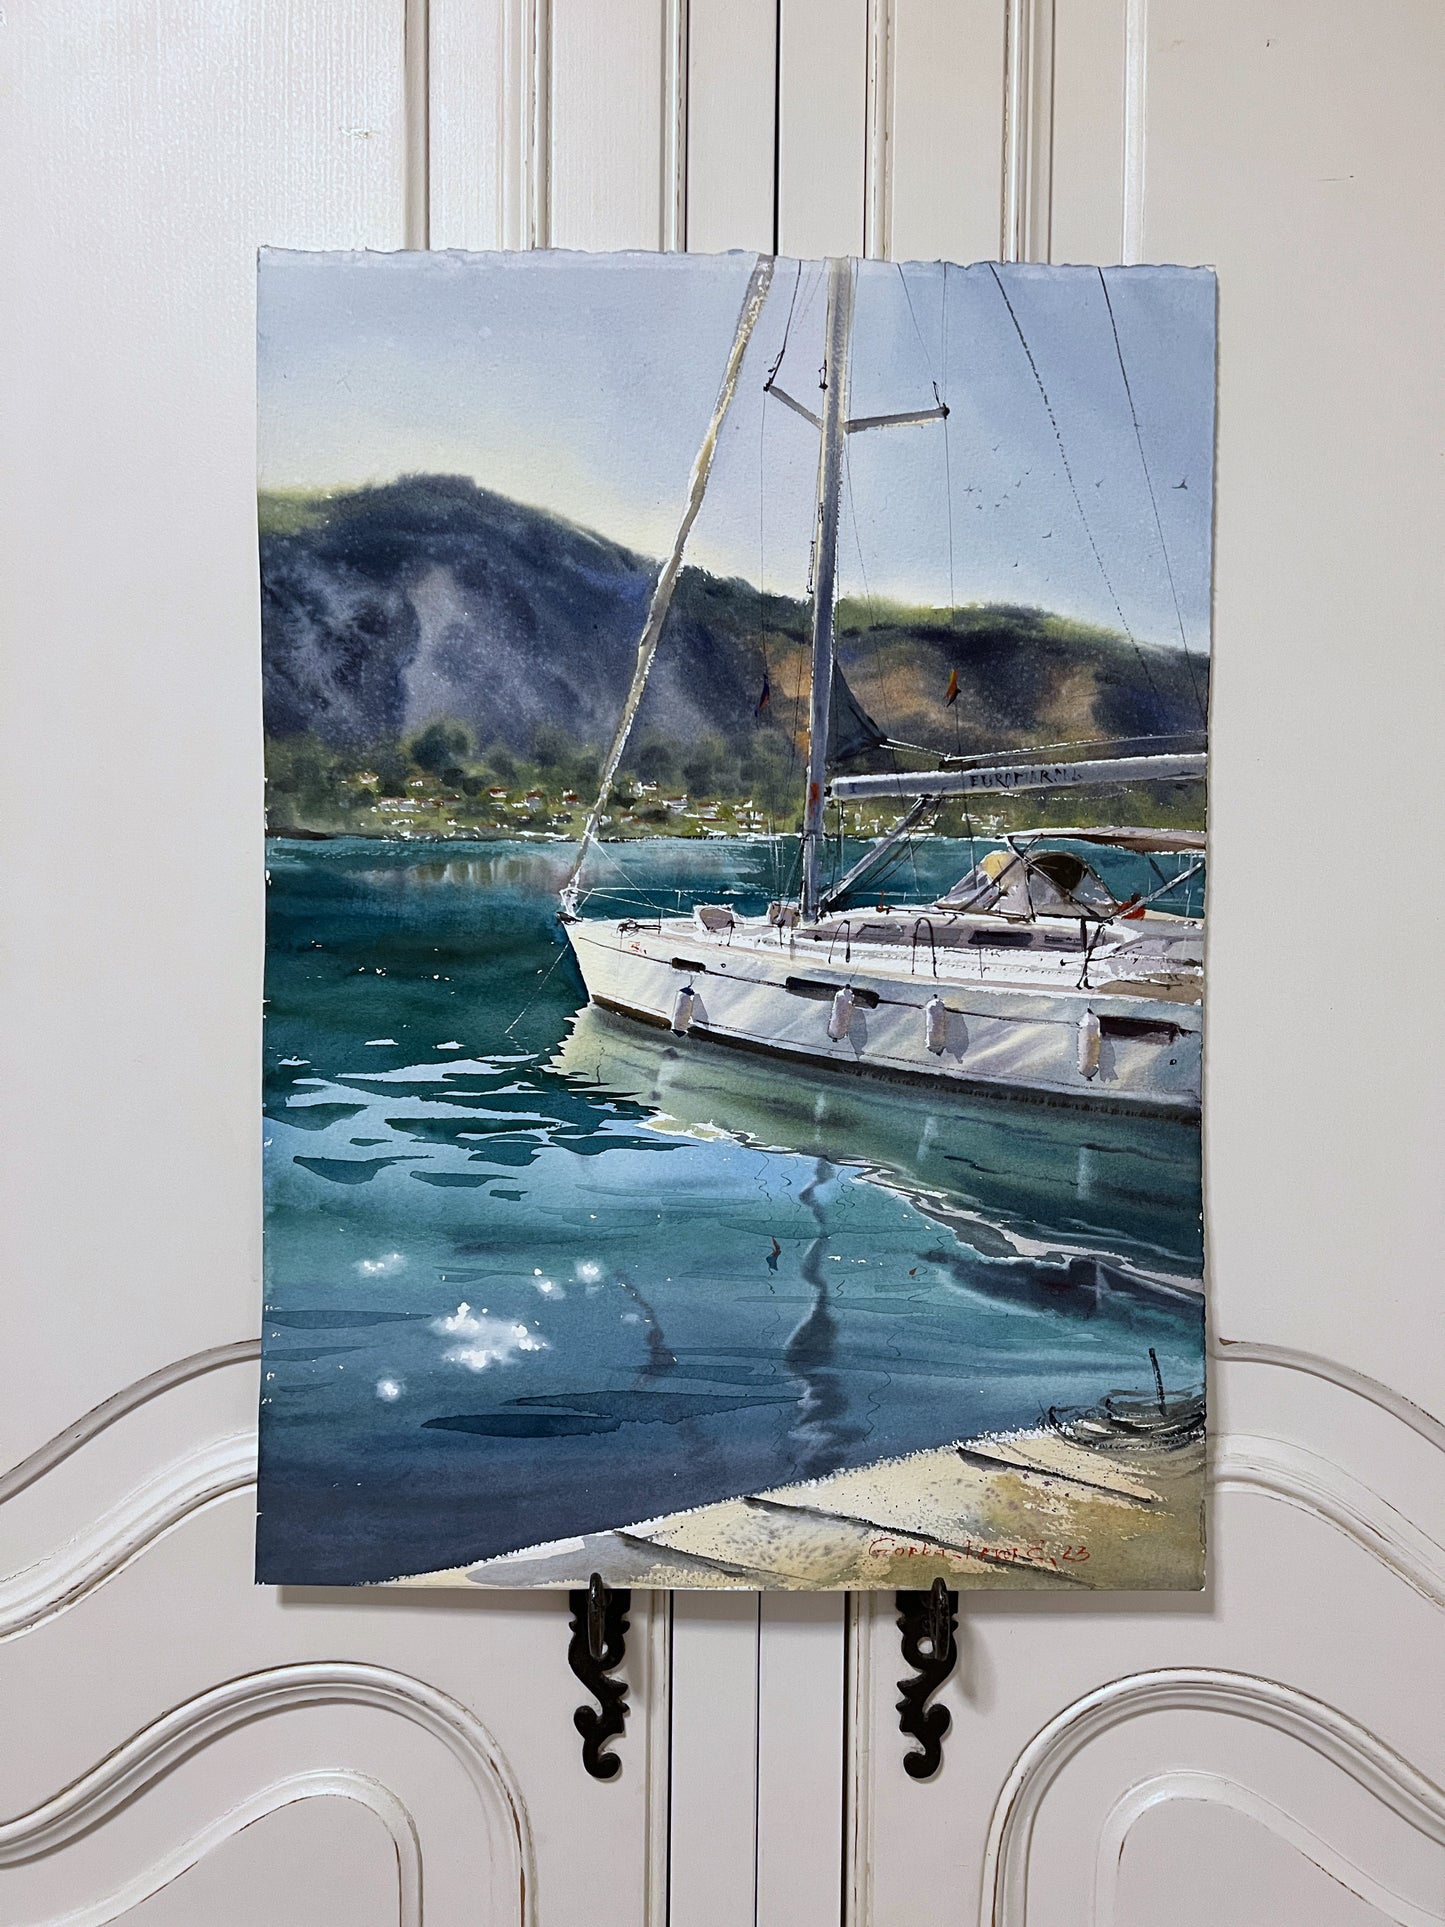 Painting Watercolor Original - Yacht on the pier. Montenegro - 15x22in